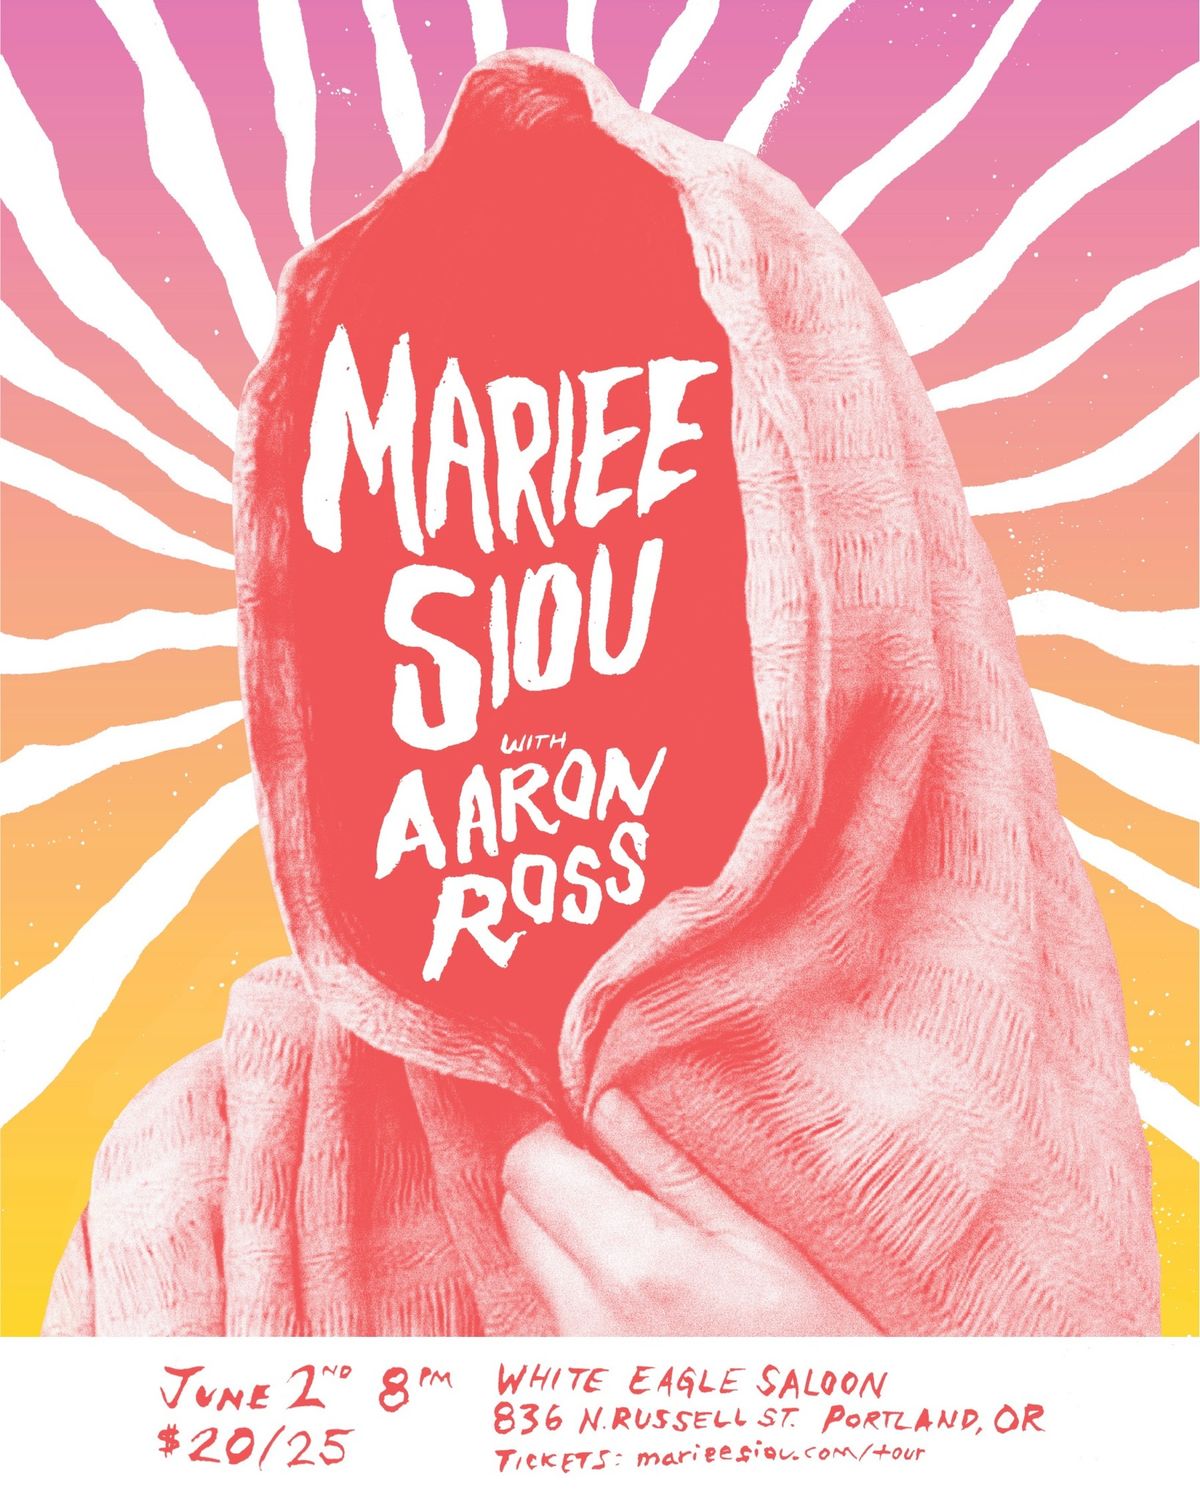 Mariee Siou w\/ Aaron Ross | The White Eagle Saloon,Portland OR